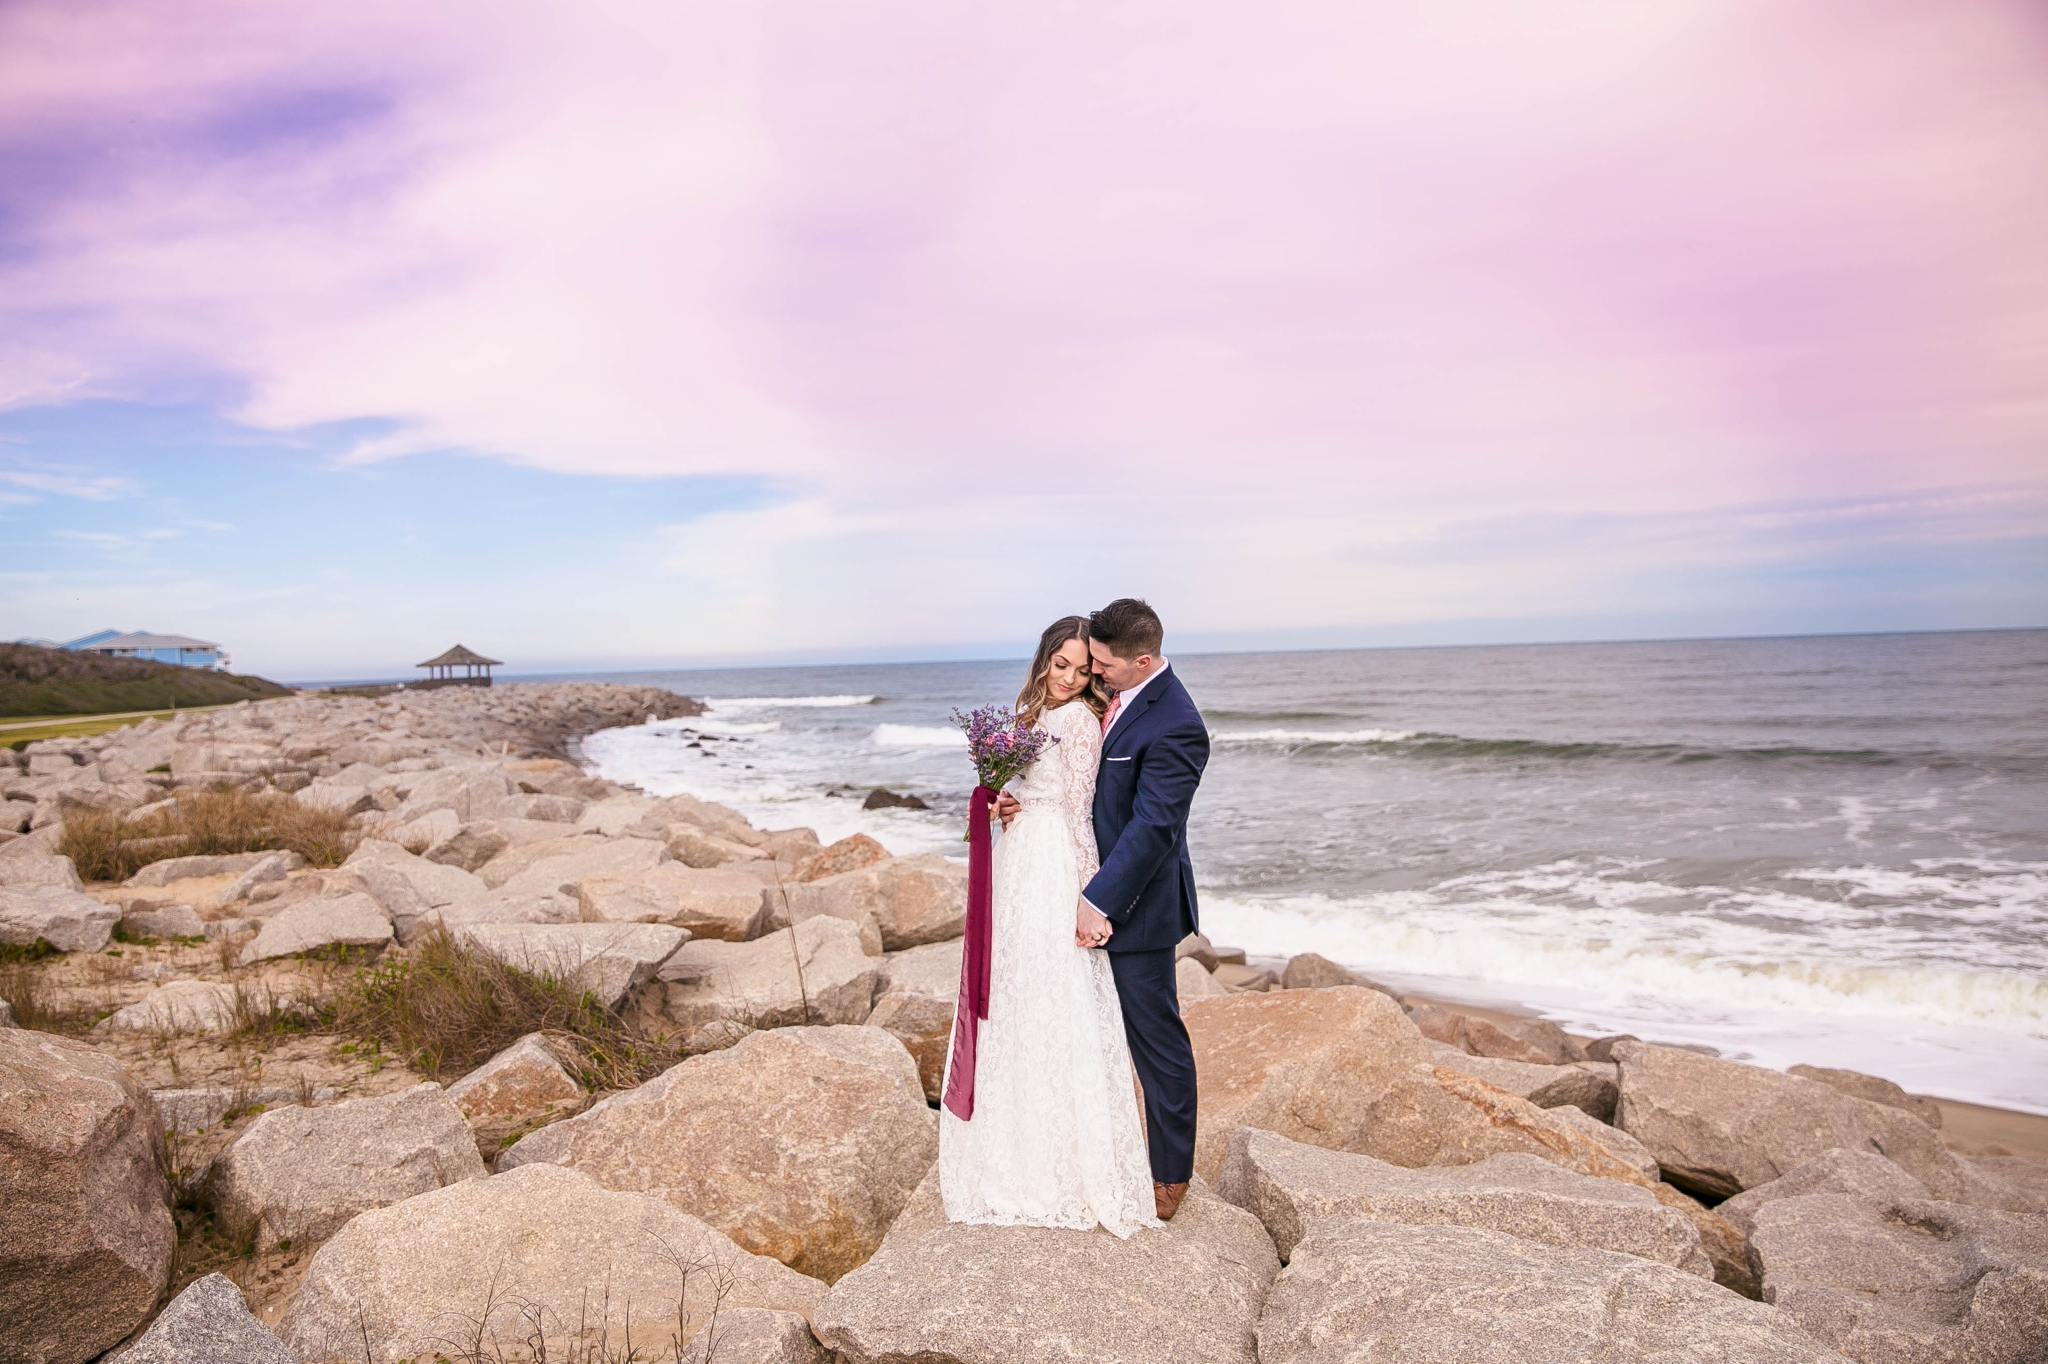 Cotton Candy Sky Beach Elopement Portraits - Bride and Groom sitting on top of rocks Cliffs - - dress by asos with purple and pink flowers and navy suit - oahu hawaii wedding photographer